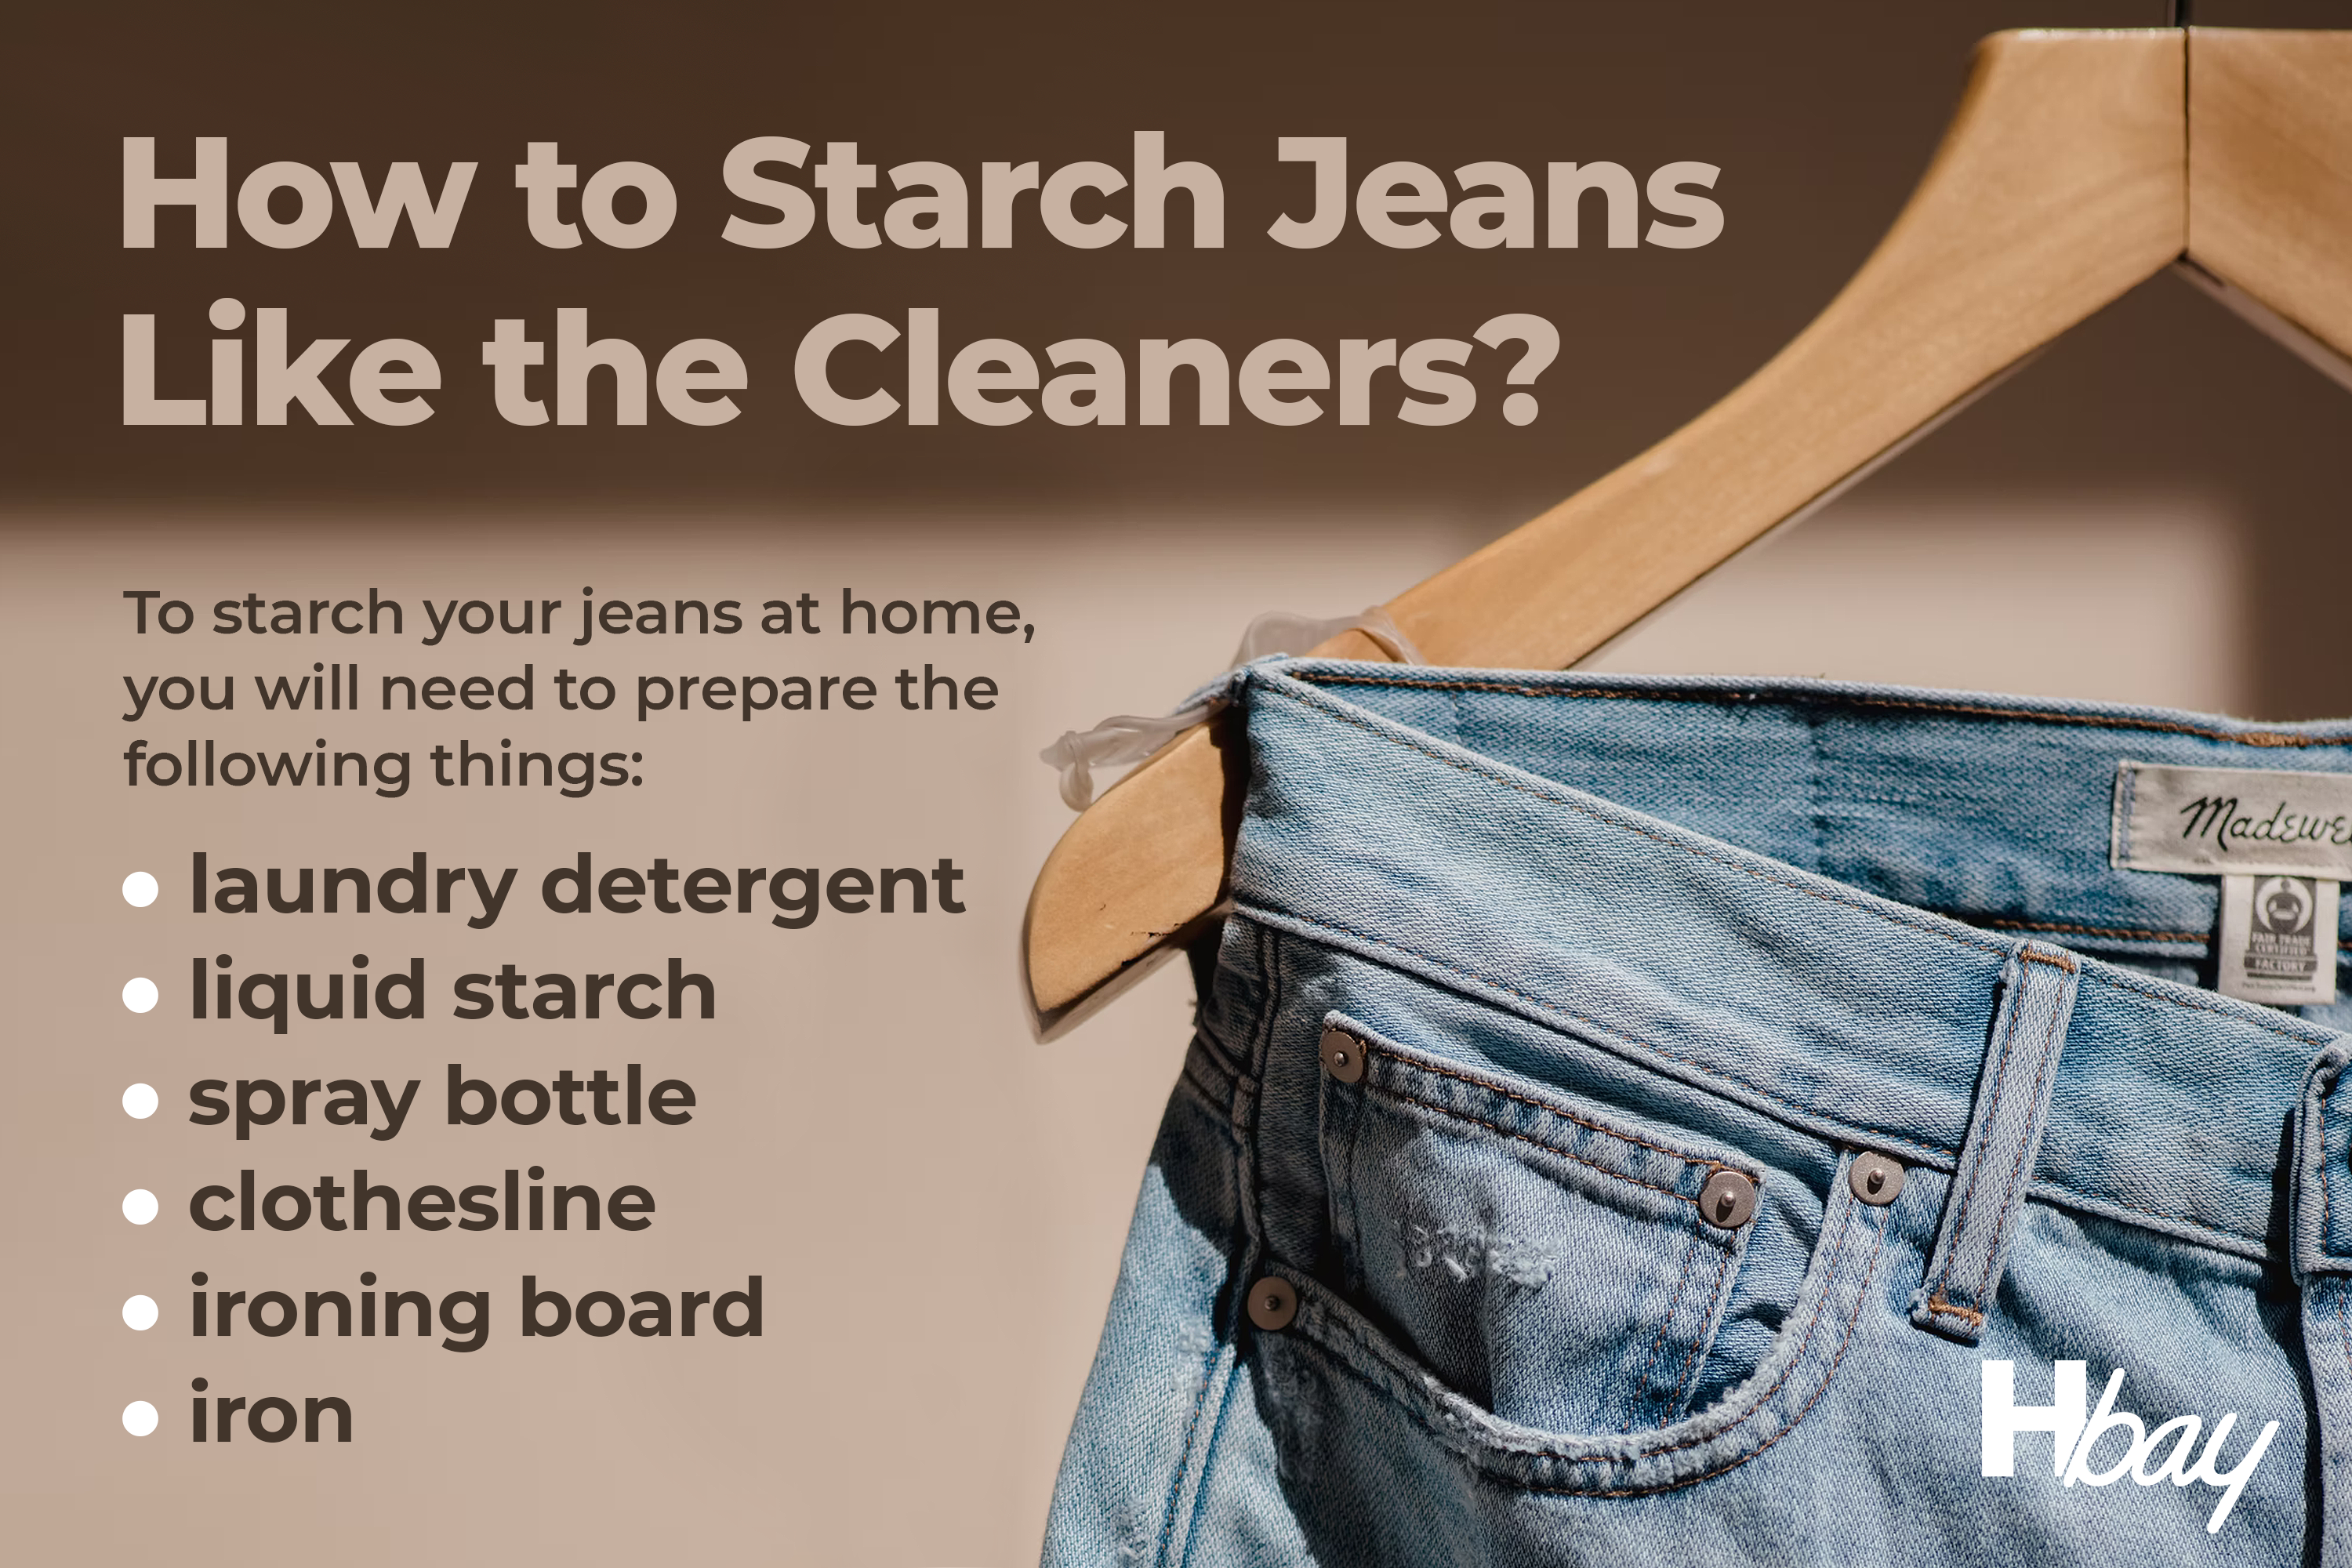 How to Starch Jeans Like the Cleaners